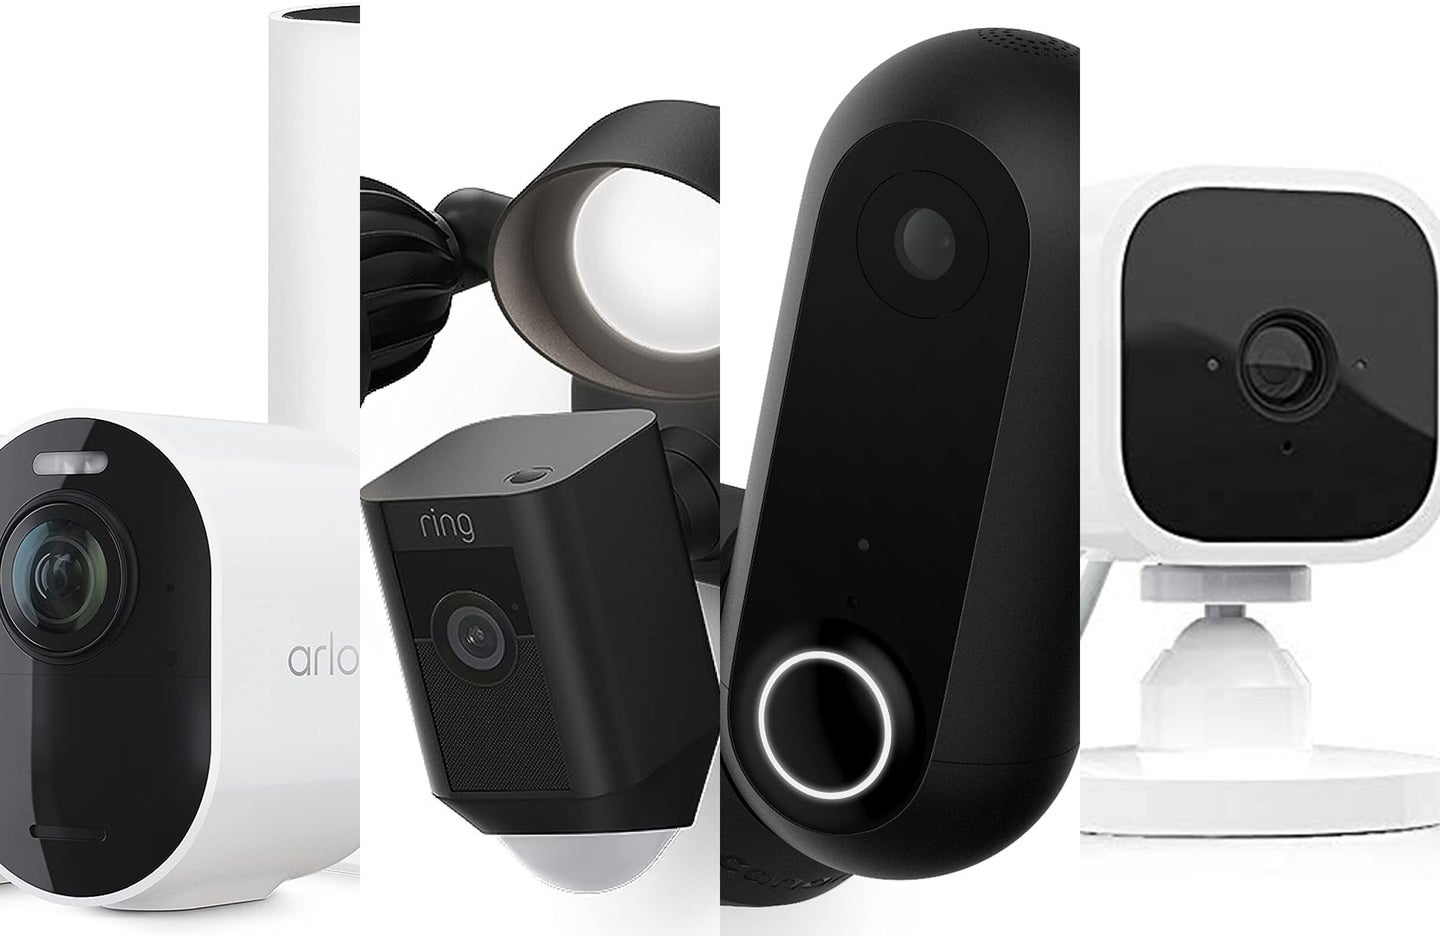 A lineup of the best home security cameras on a white background